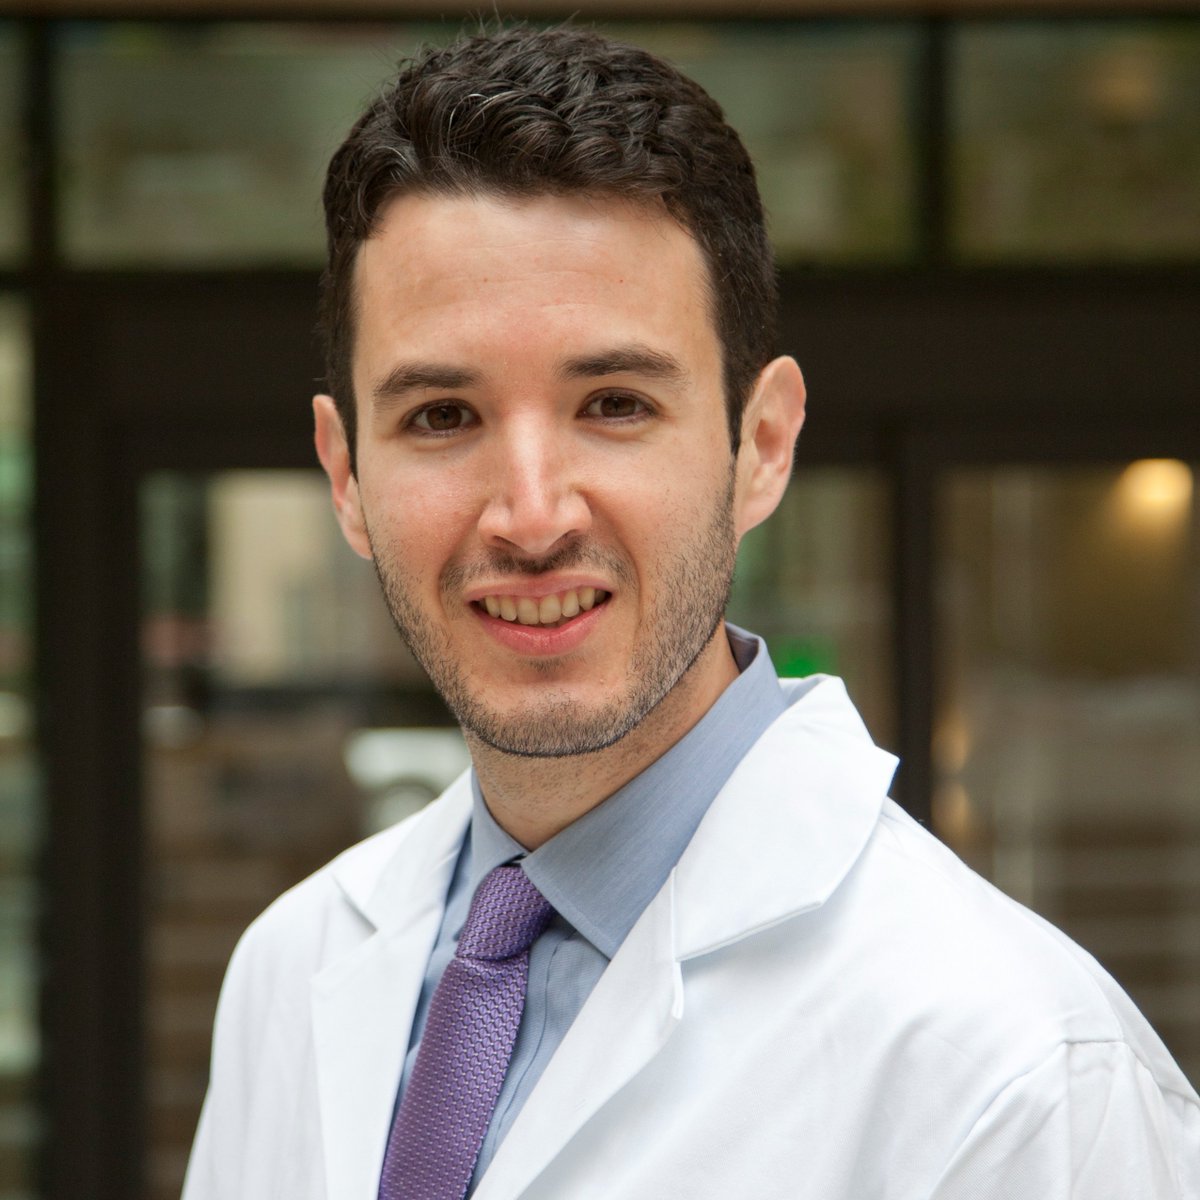 .@JamesSalazarMD was nominated by @jteerlinkmd and awarded a Young Trialist Grant to attend the Global Cardiovascular Clinical Trialists (CVCT) Forum in December 2022. Congrats! @UCSF_CVfellows